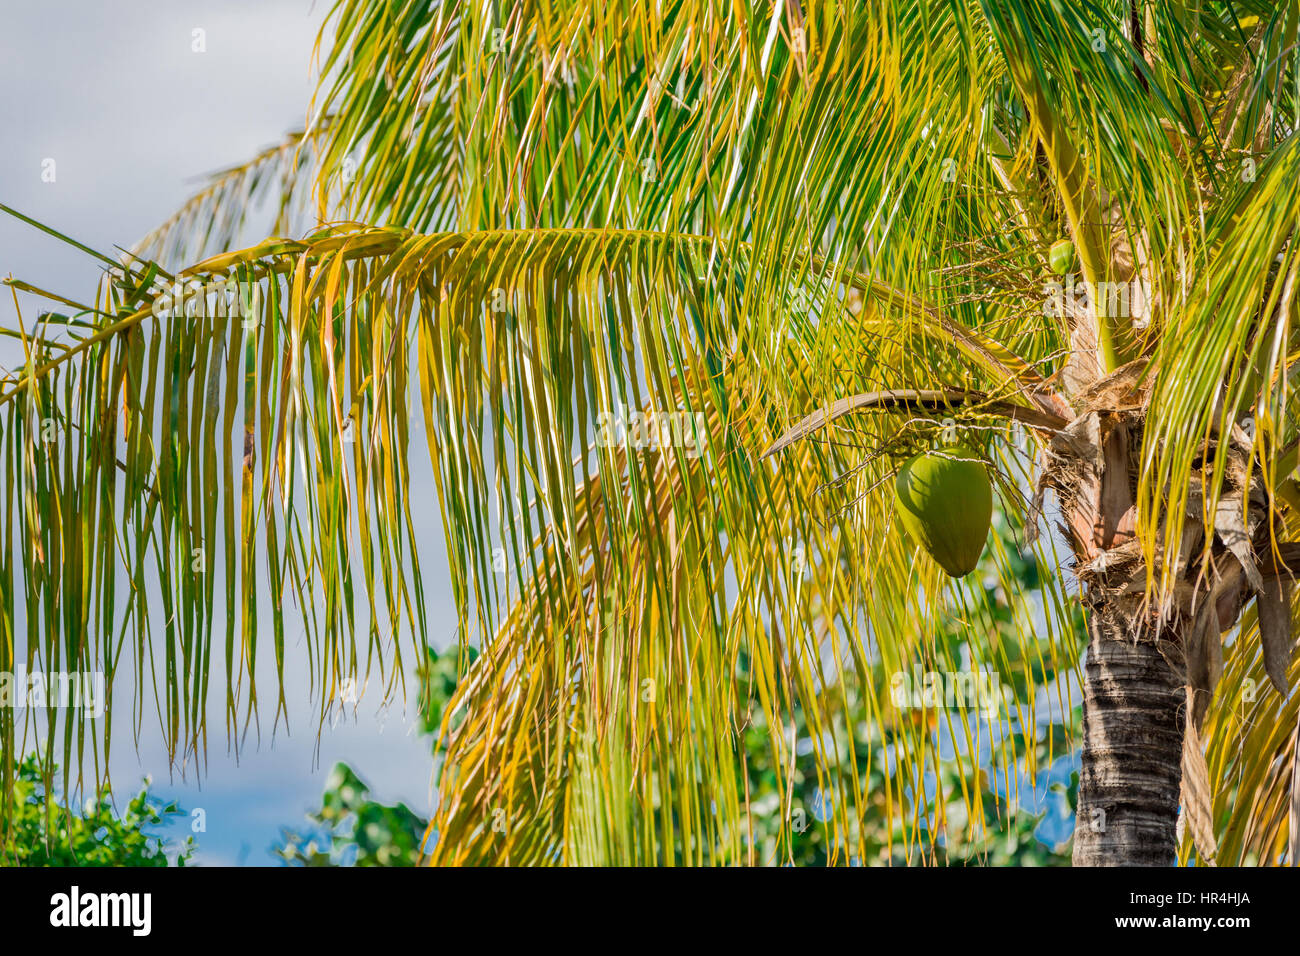 green coconut hanging in a vibrant palm tree in St Bart's Stock Photo